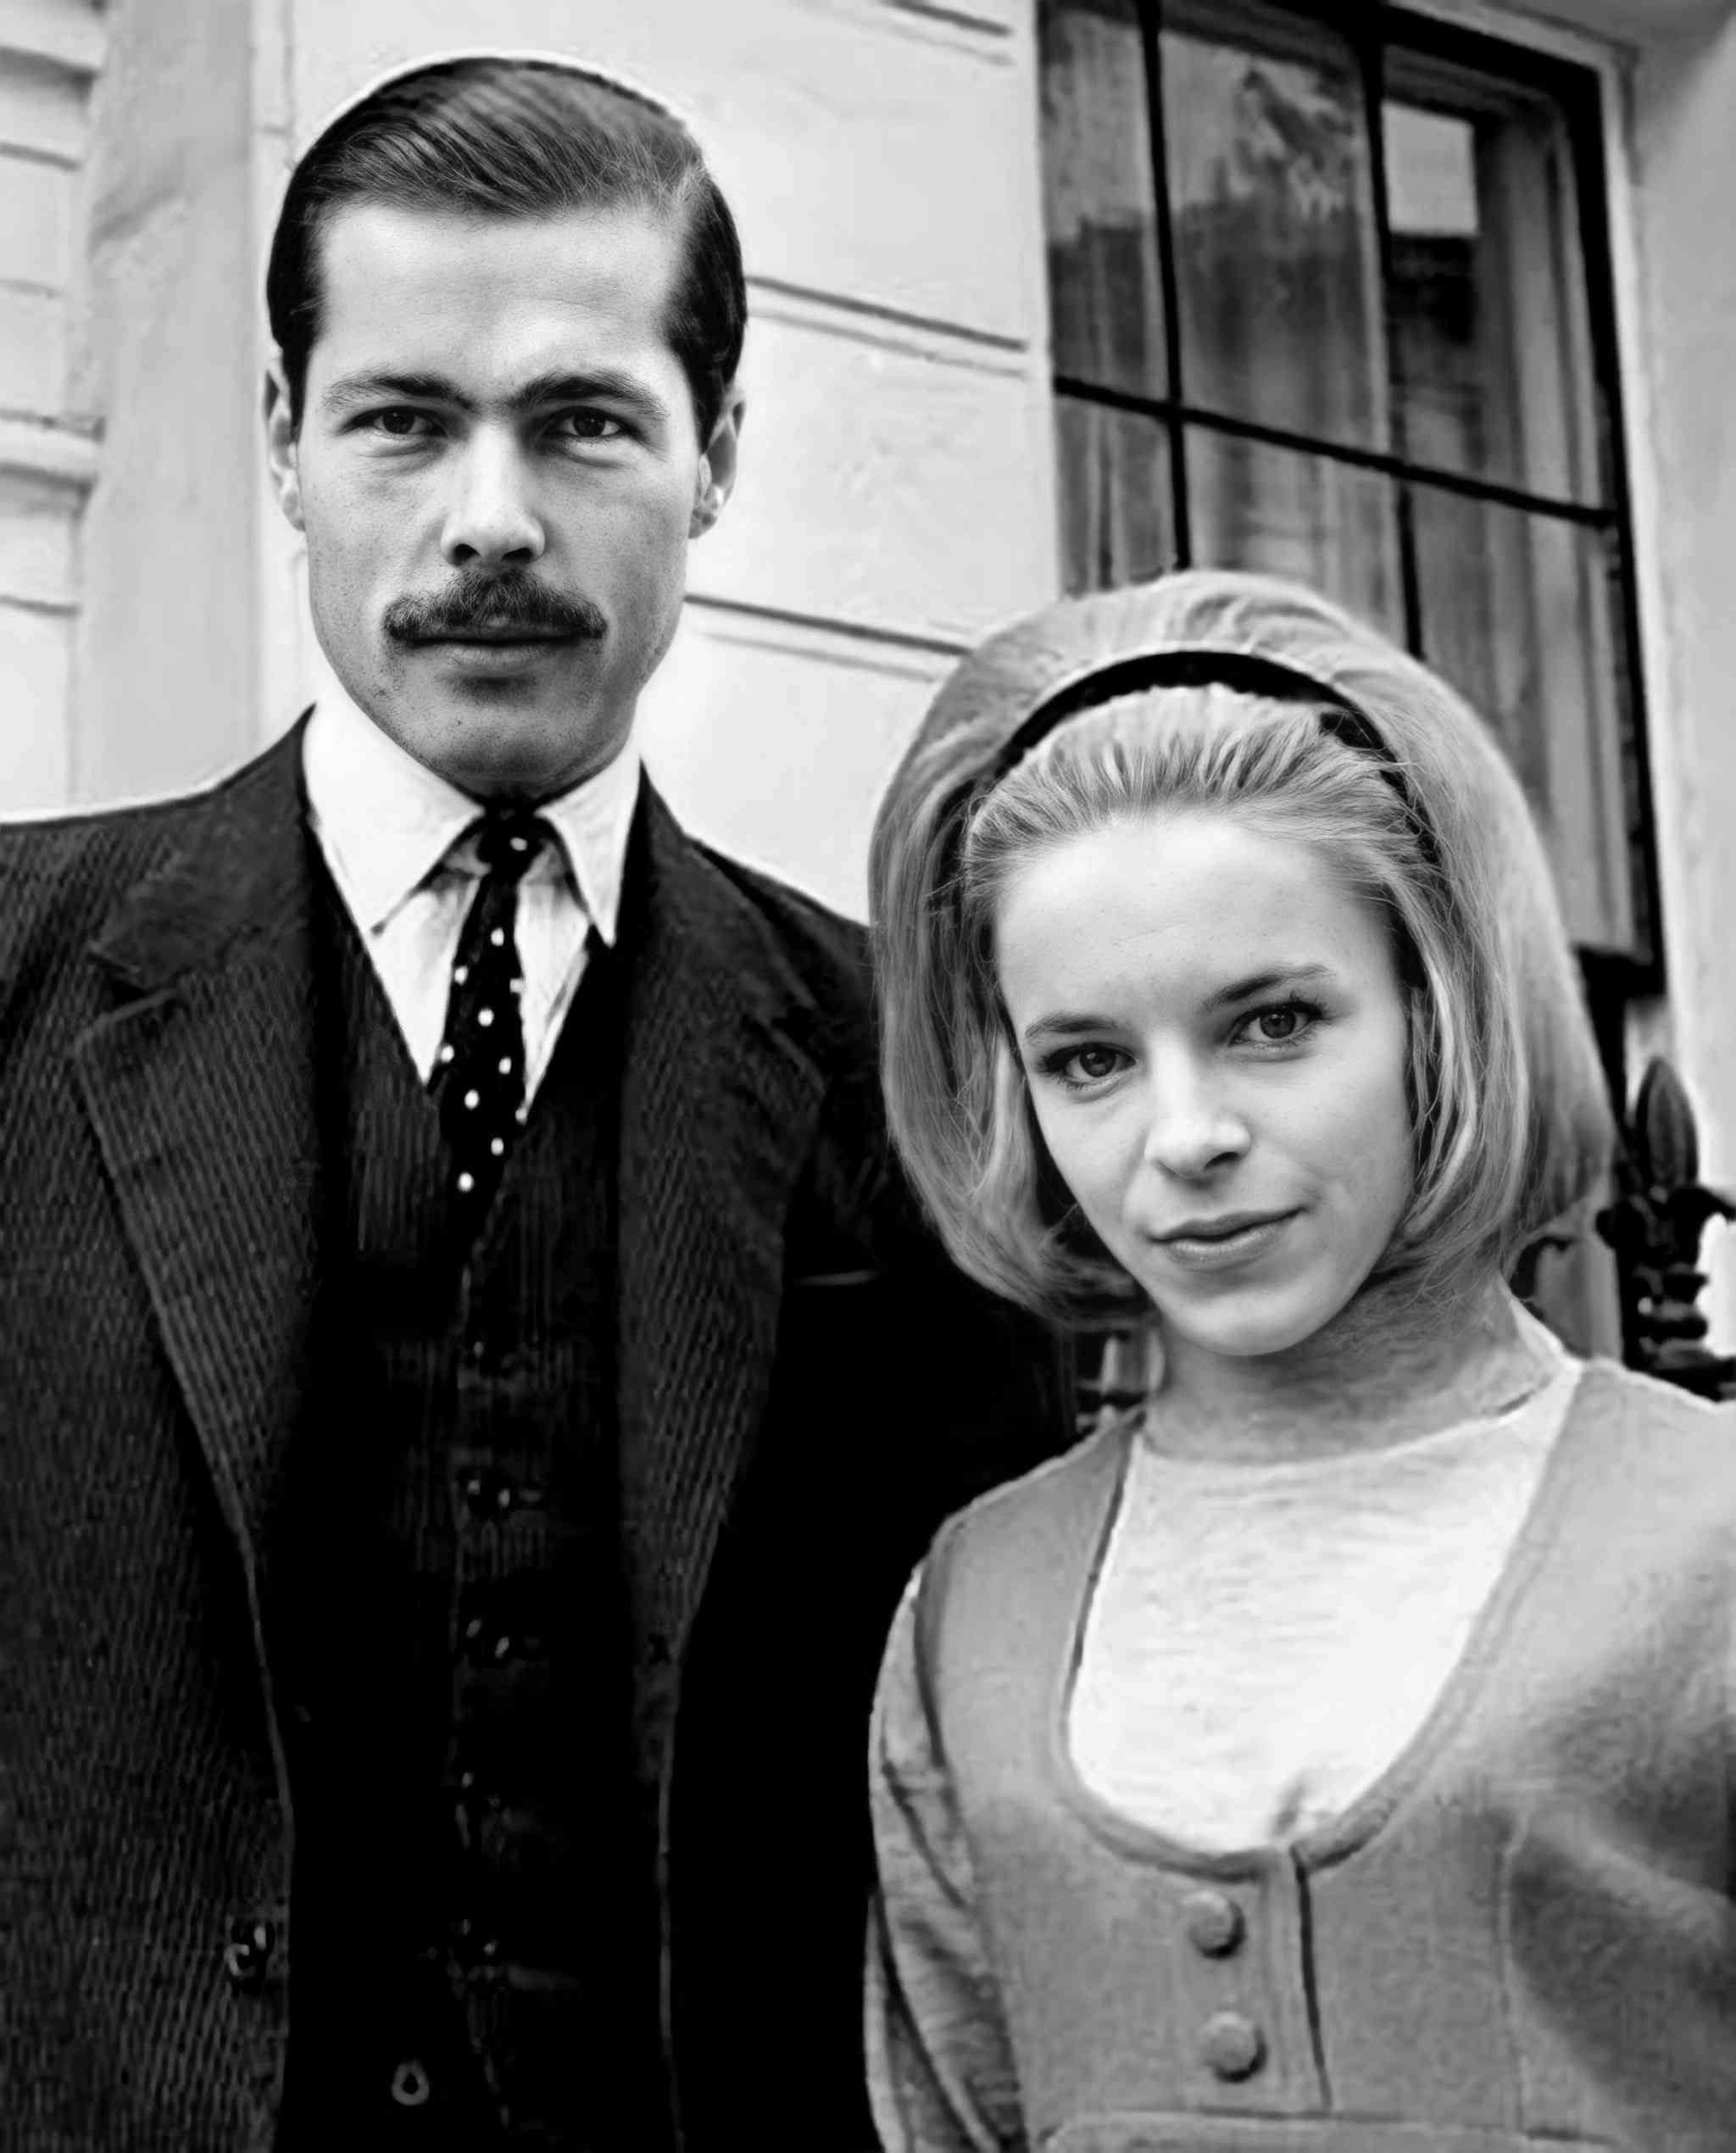 The Earl of Lucan with his then fiancee Veronica Duncan, who later became the Countess of Lucan